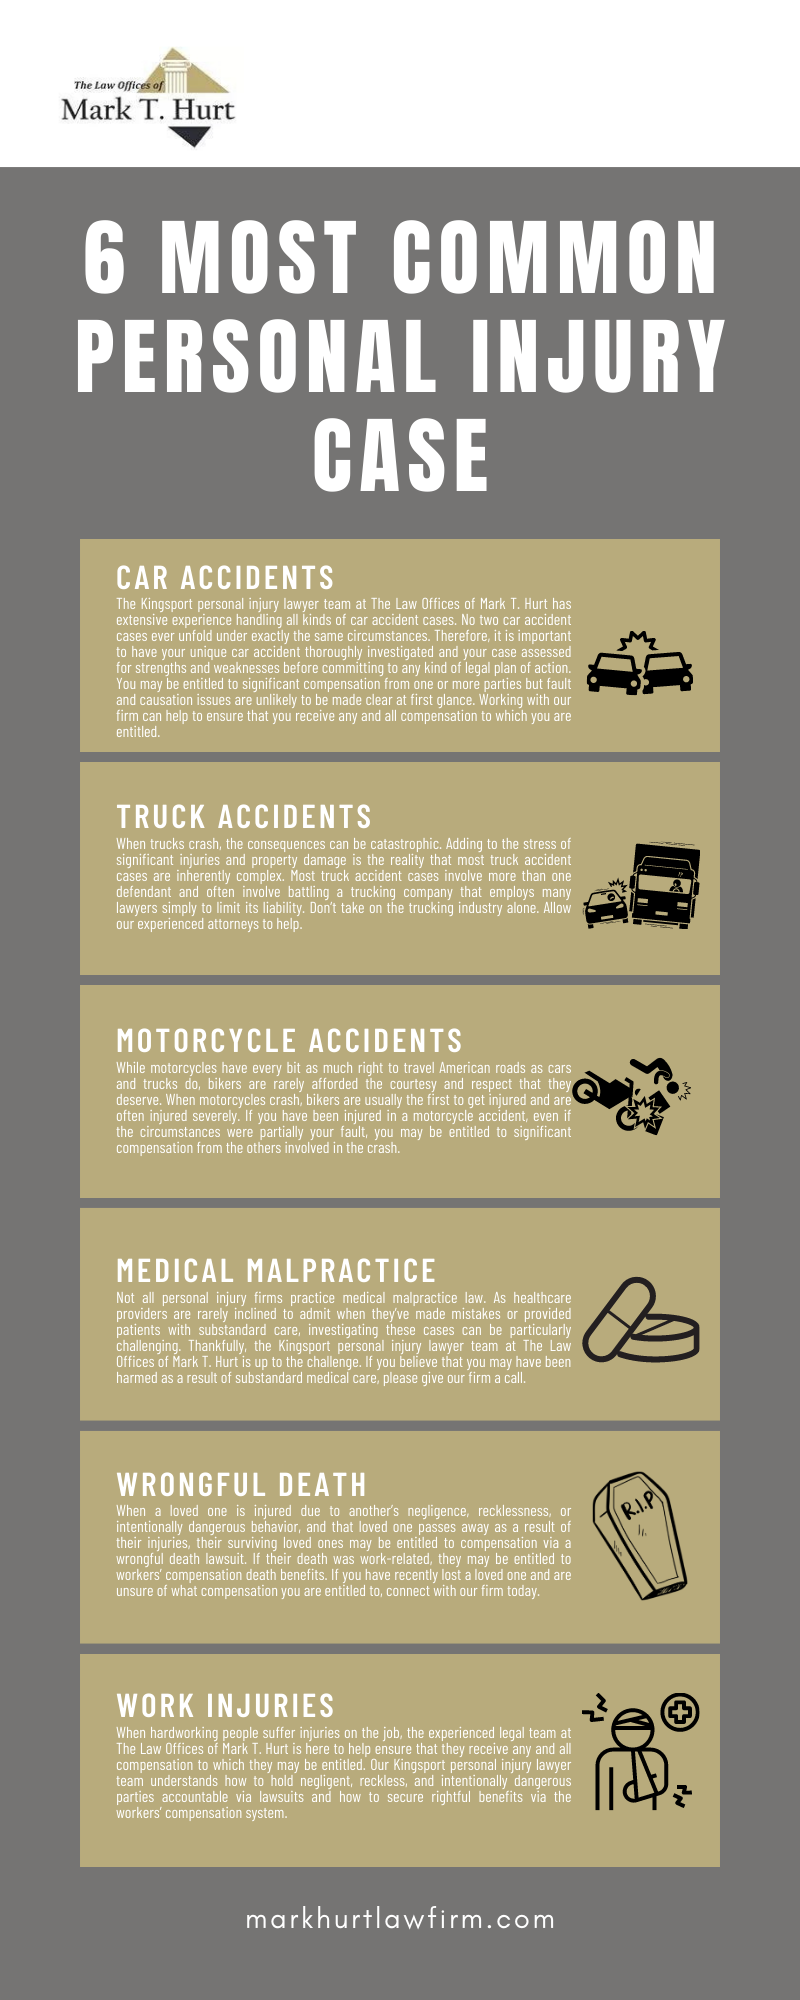 6 MOST COMMON PERSONAL INJURY CASE INFOGRAPHIC